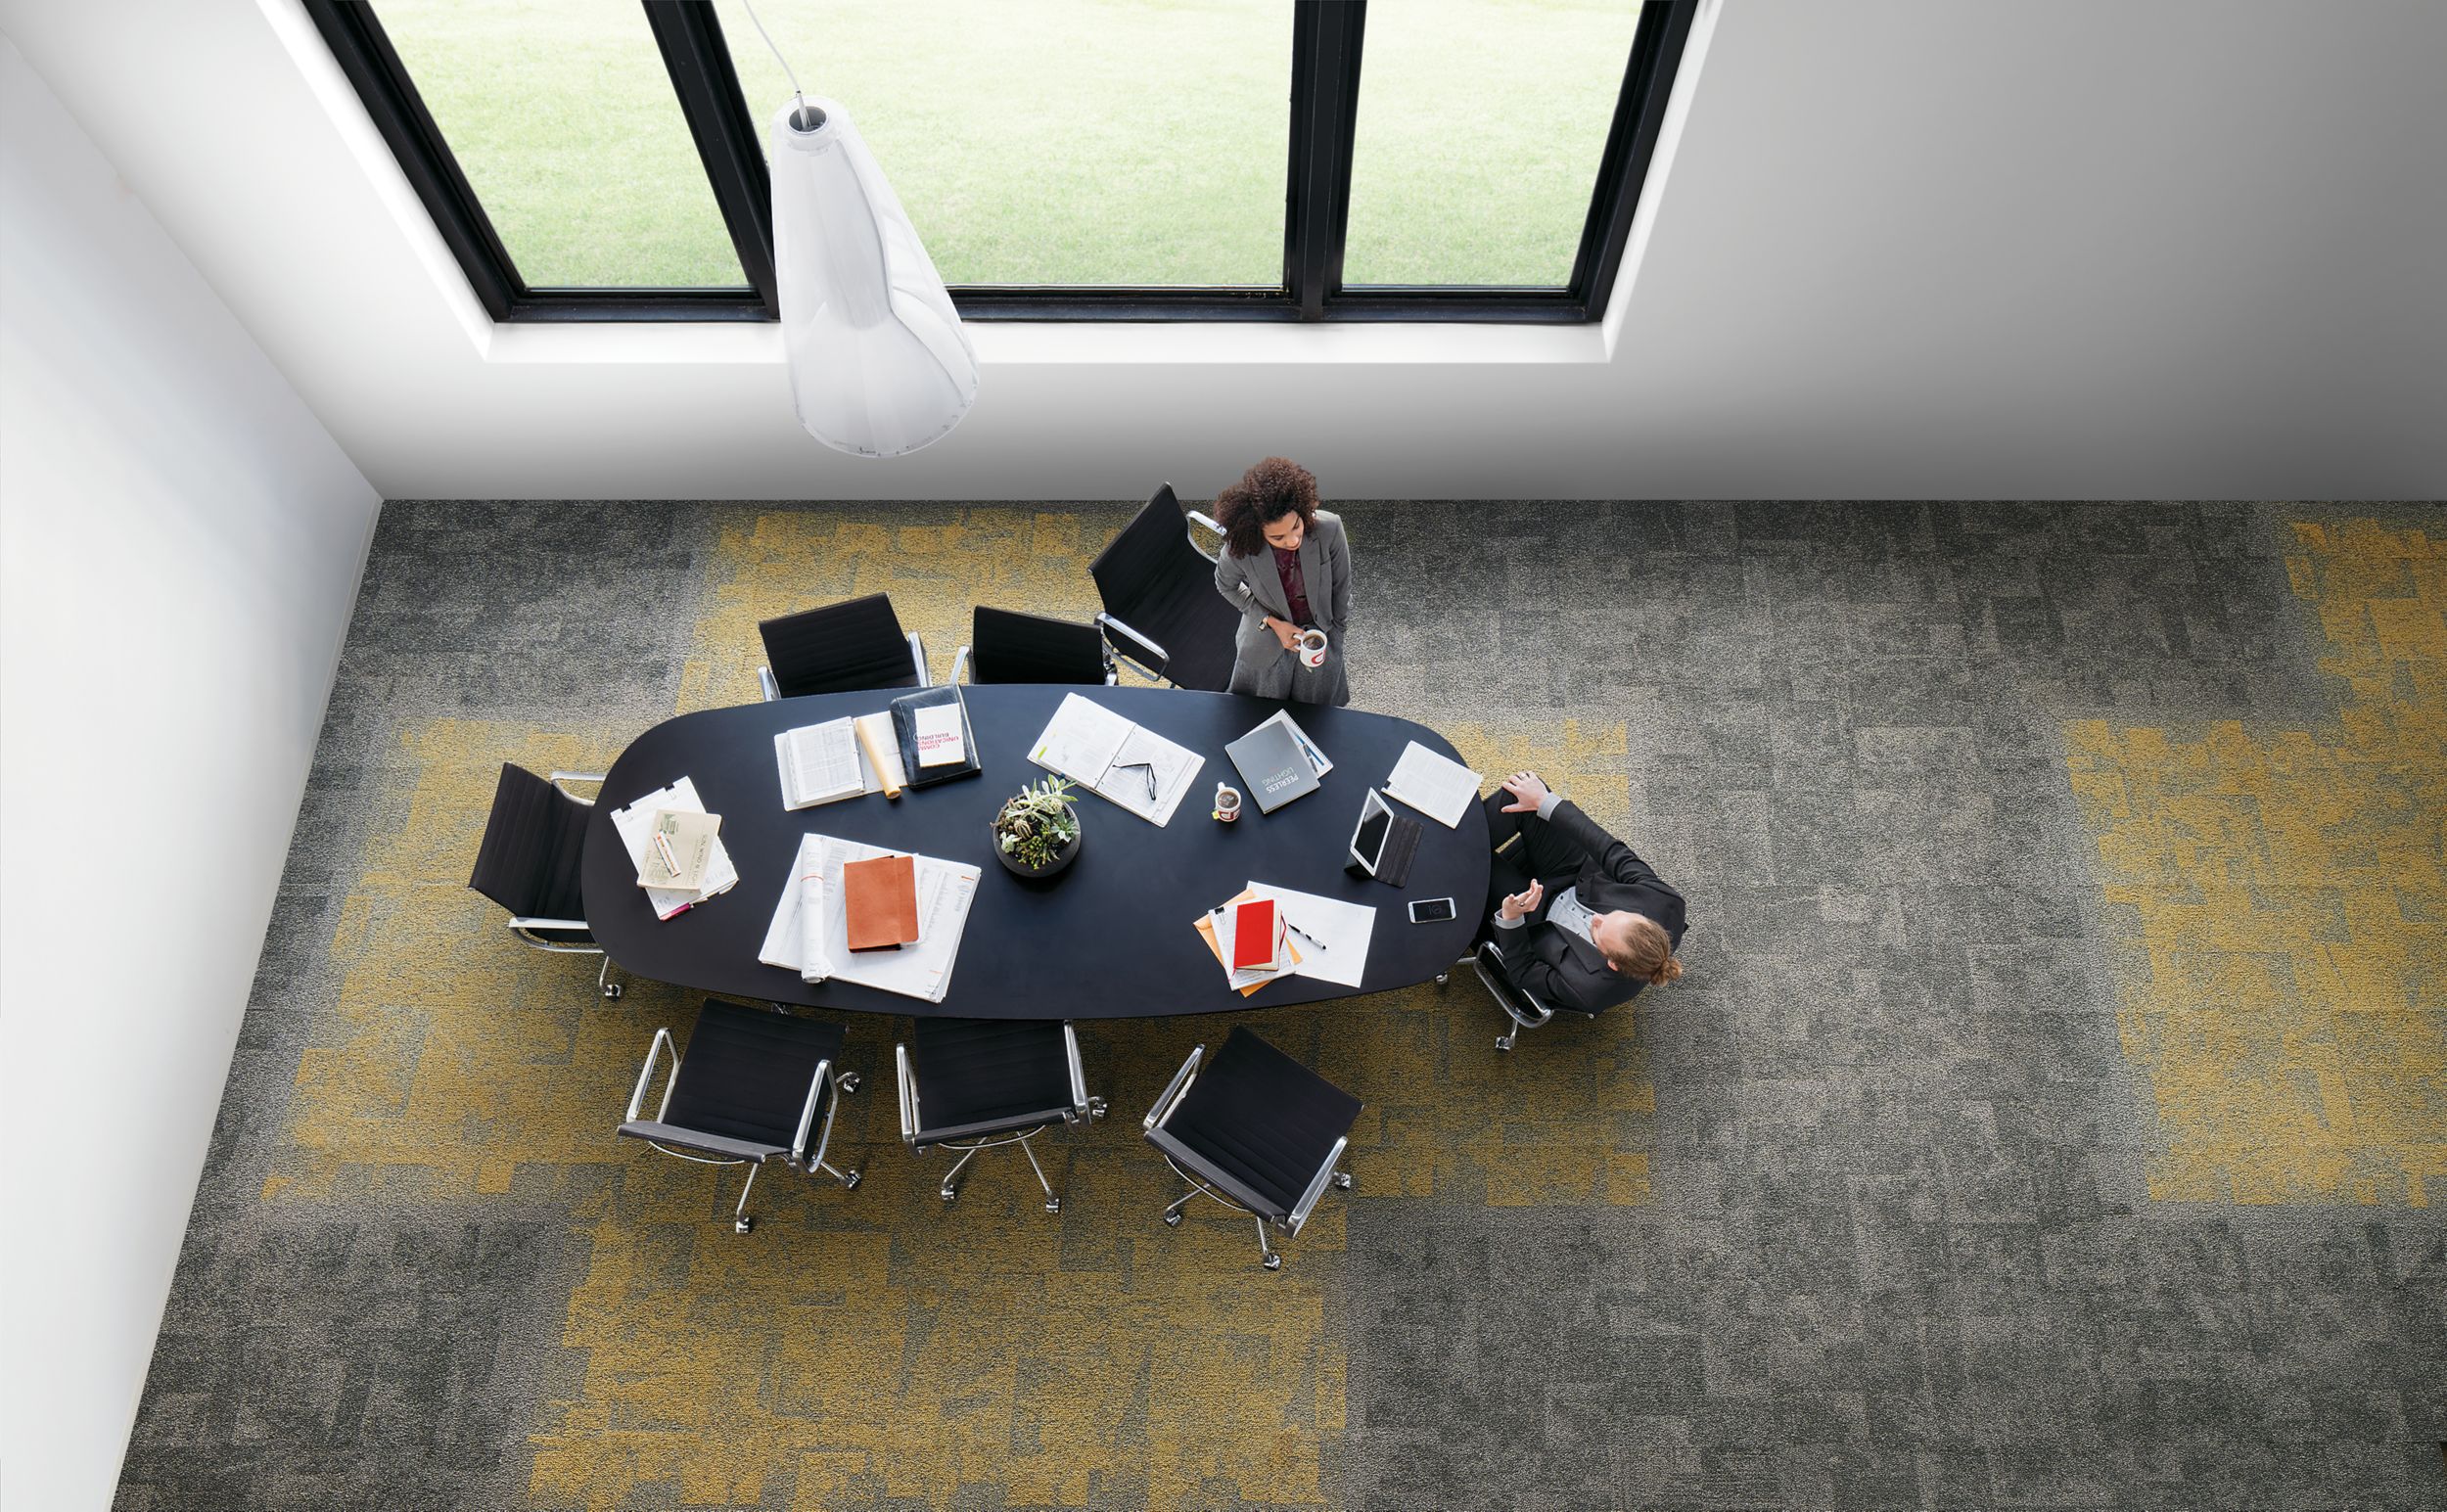 Interface Open Air 404 carpet tile in overhead view of meeting table with man and woman talking and drinking coffee numéro d’image 1